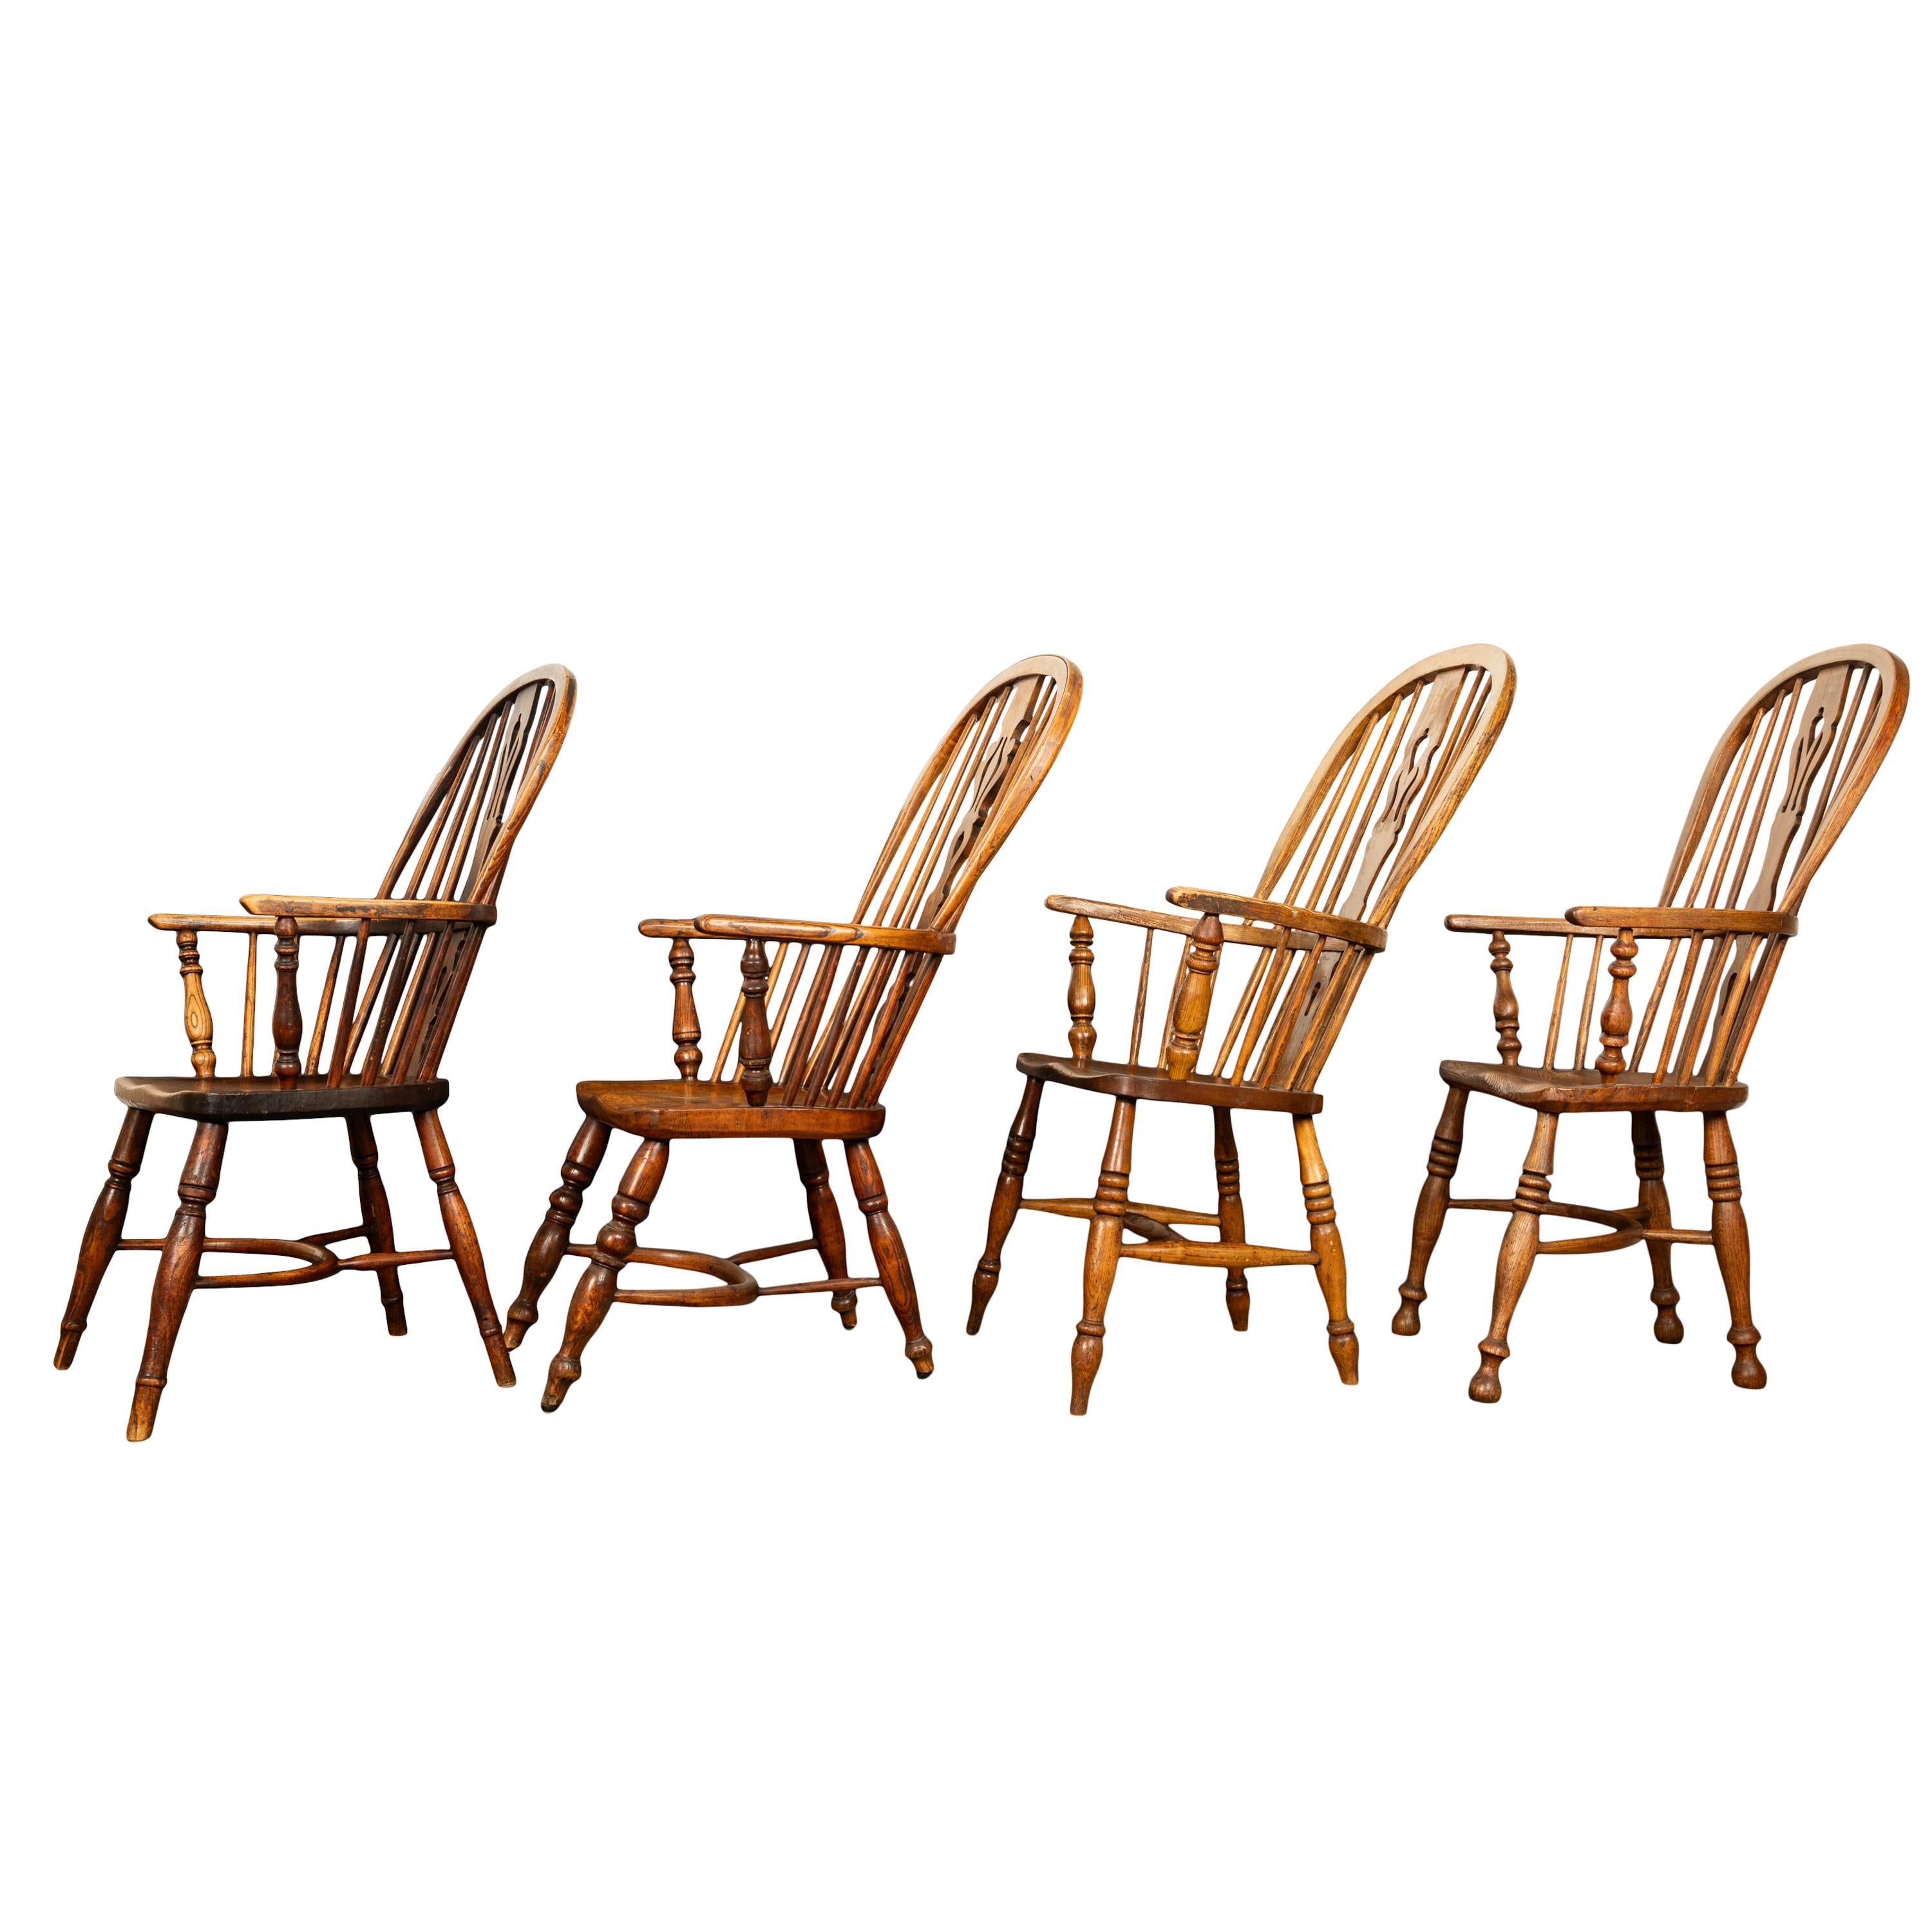 Set 4 Antique 19thC High-backed English Ash Elm Country Windsor Arm Chairs 1840  For Sale 1